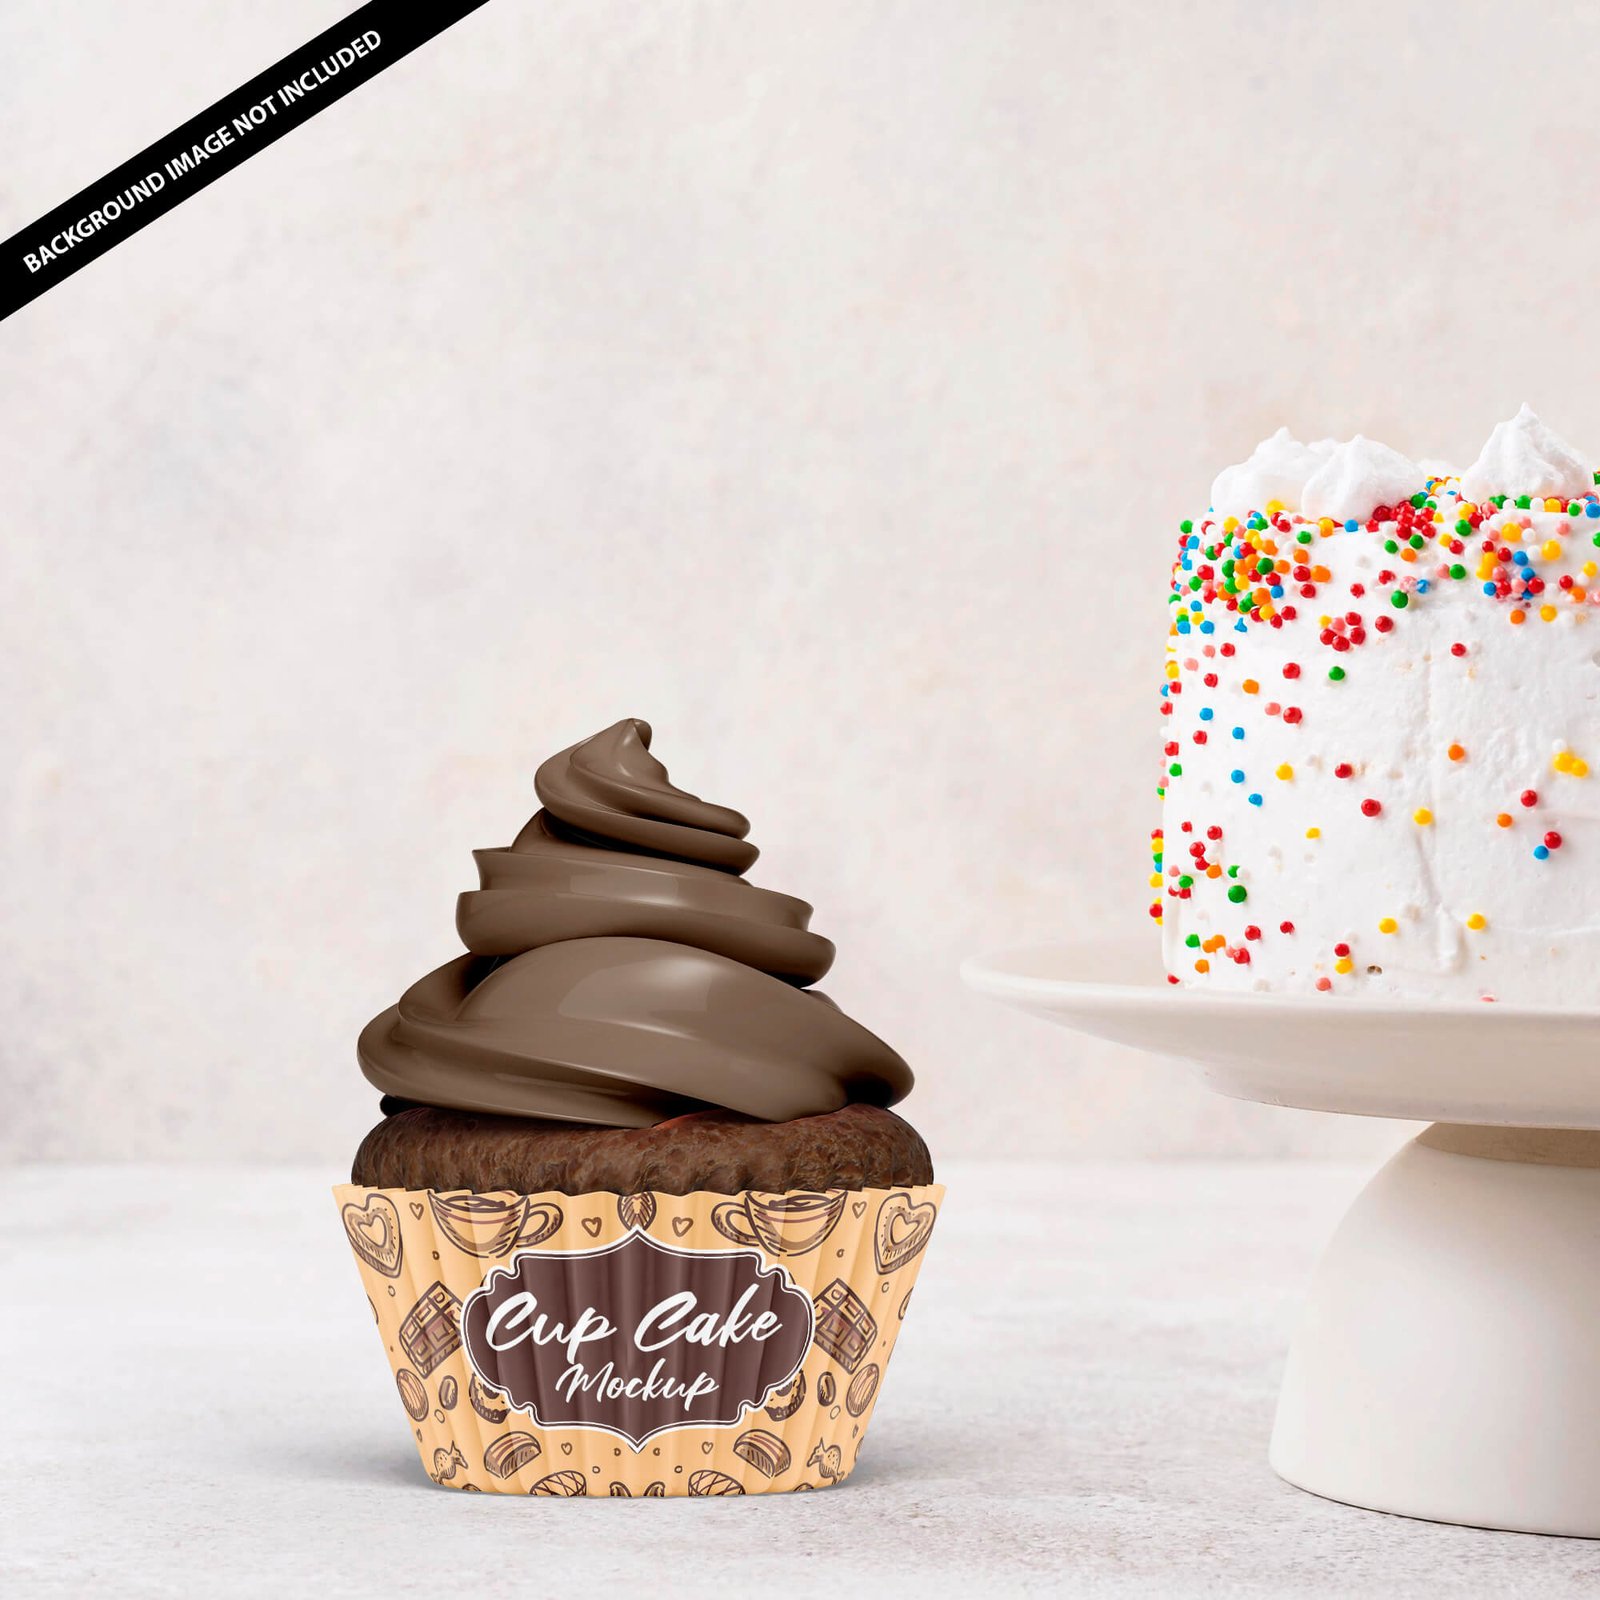 Download 21 Free Creative Cupcake Mockup Psd Template With Topping